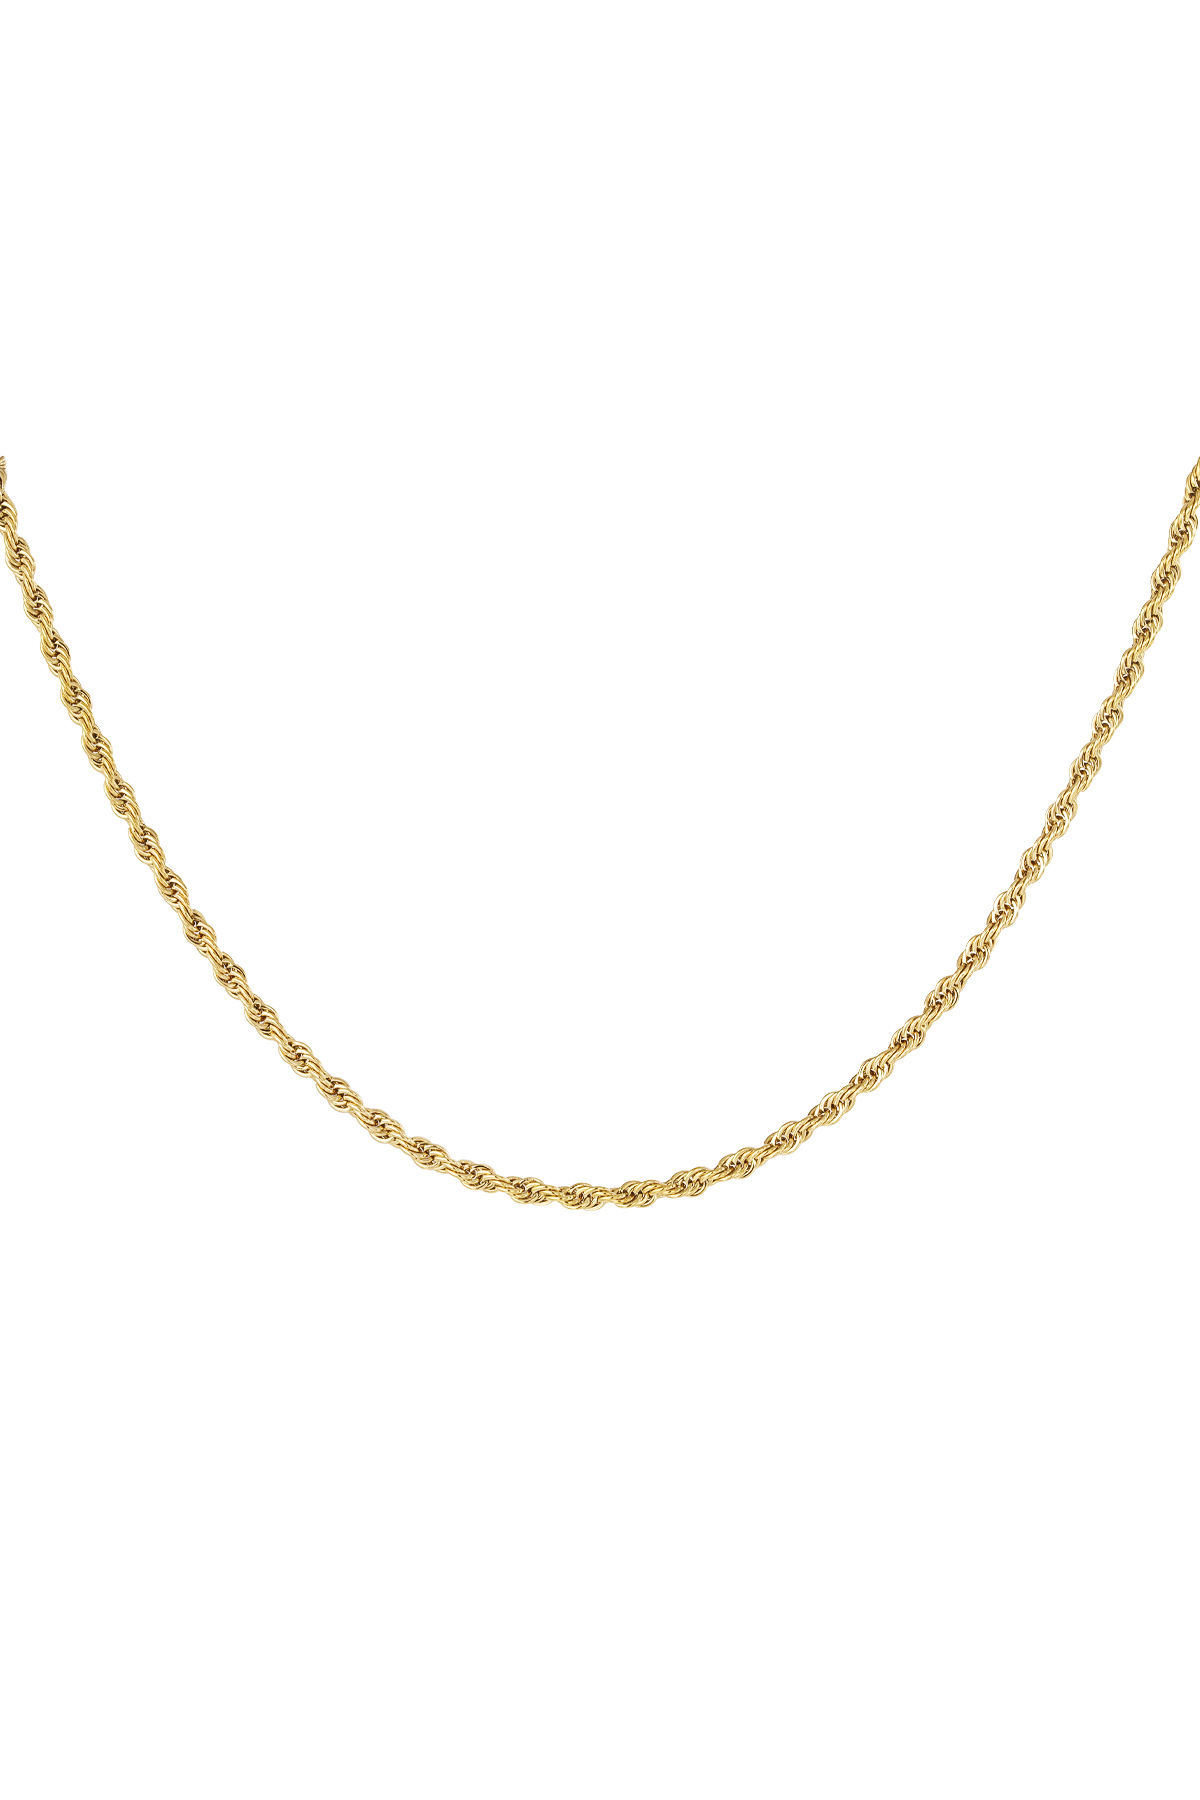 Unisex necklace twisted short - gold-3.0MM 